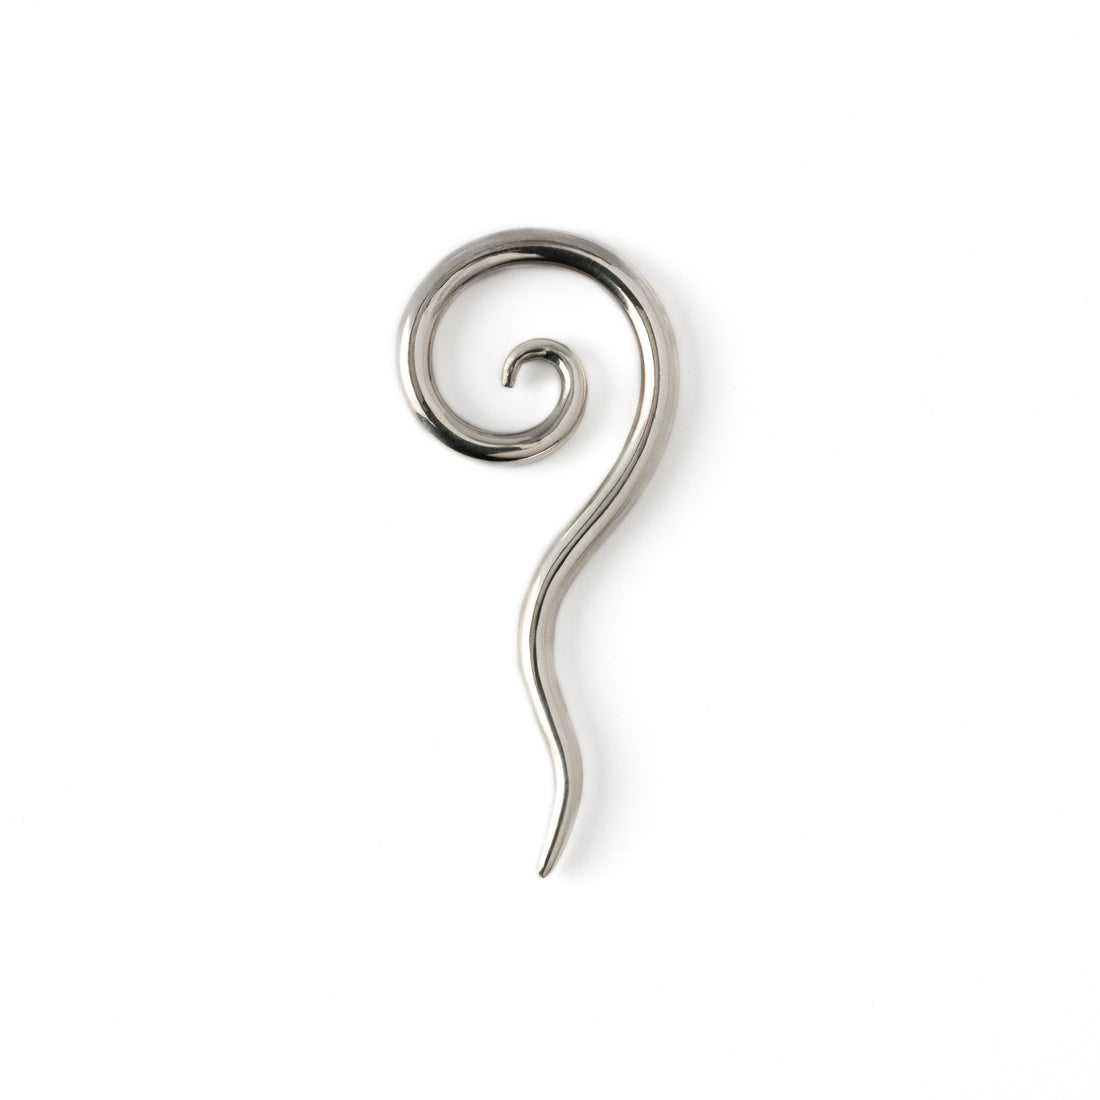 SINGLE SILVER LONG TAILED SPIRAL EAR STRETCHER HANGER SIDE VIEW